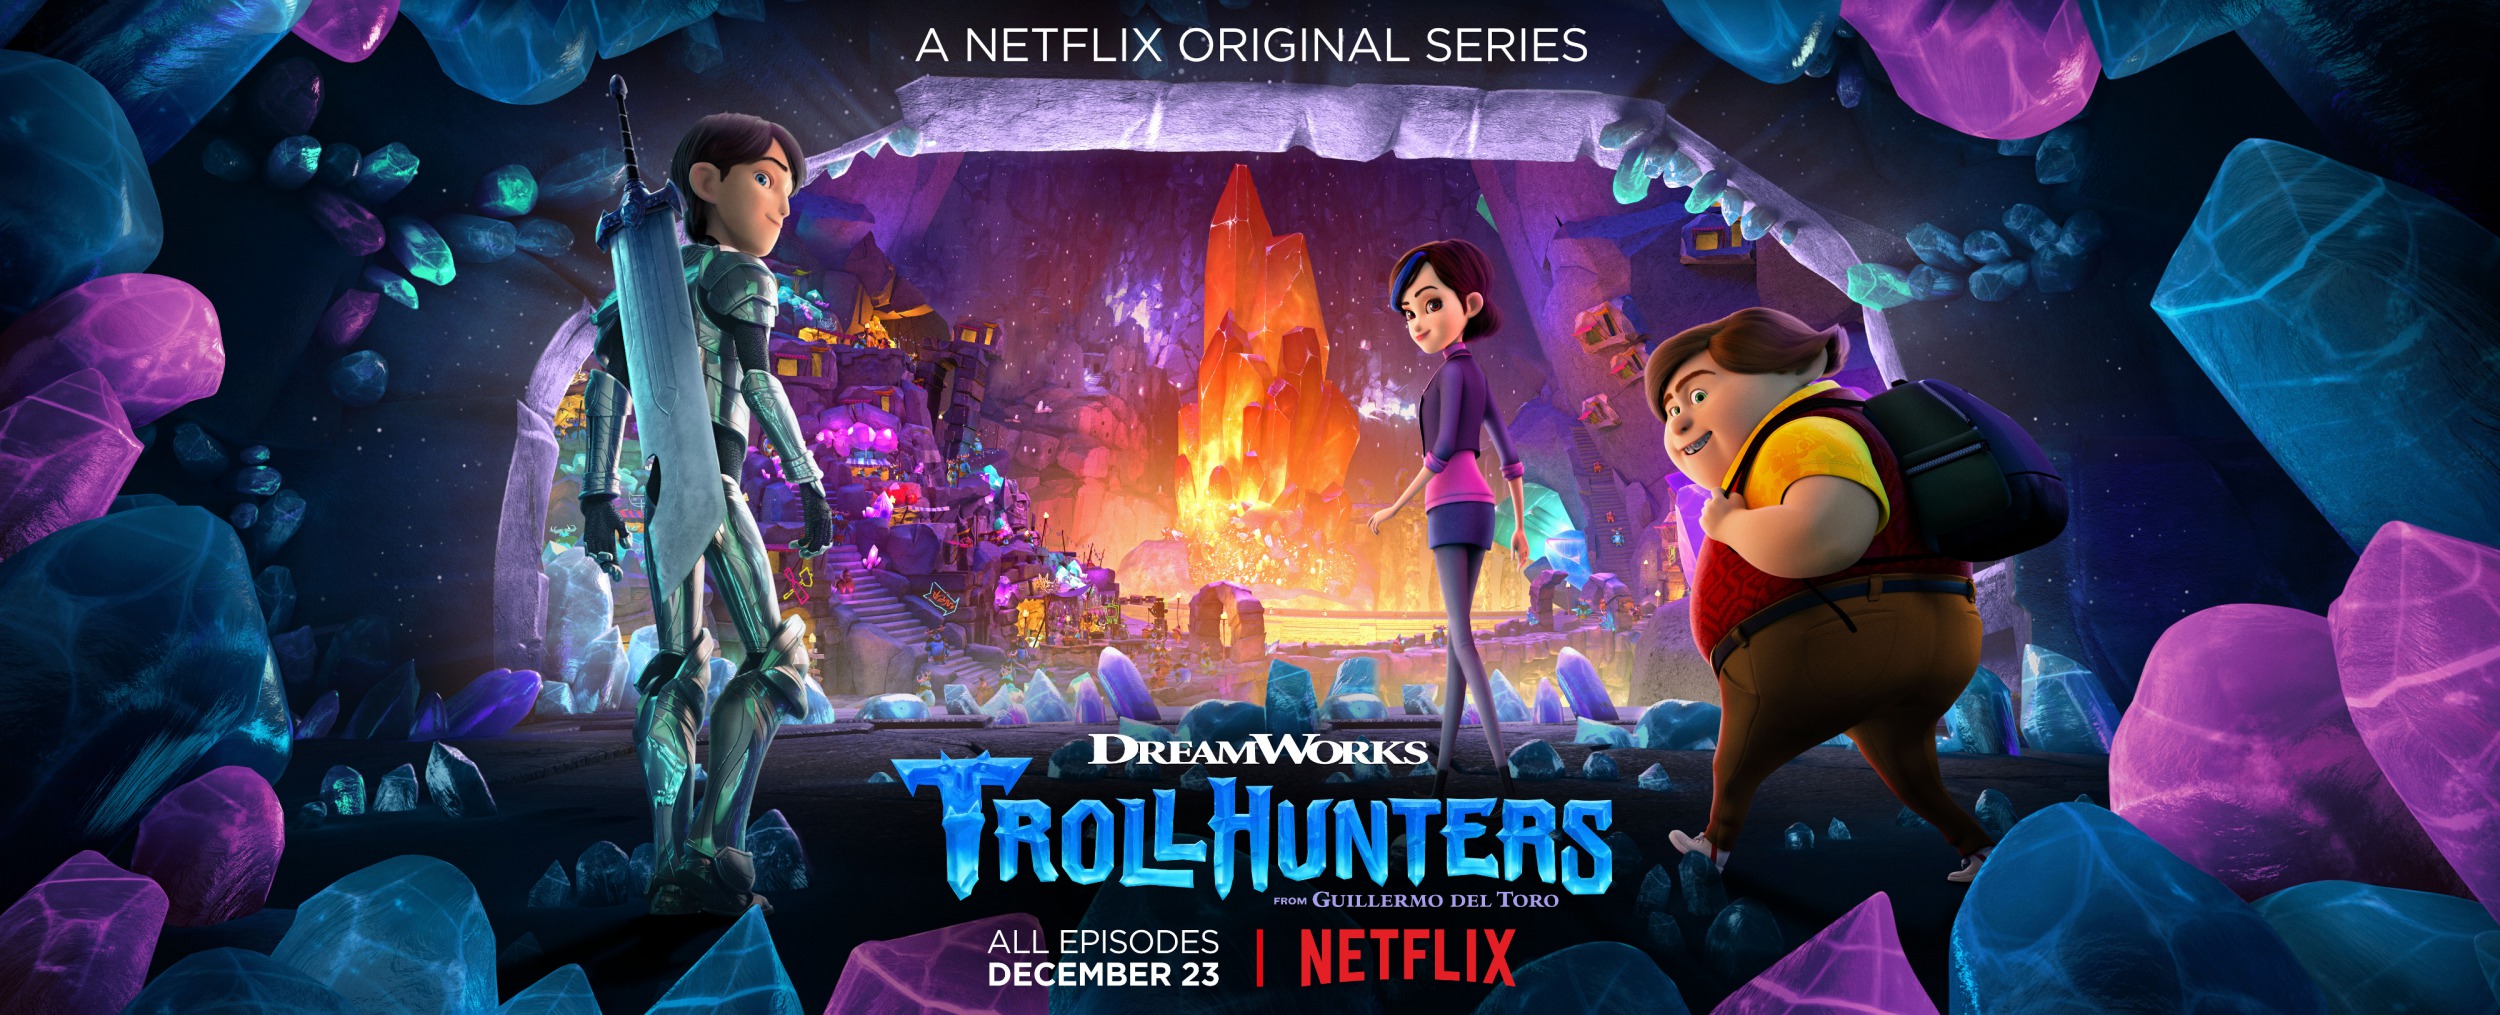 Mega Sized TV Poster Image for Trollhunters (#15 of 20)